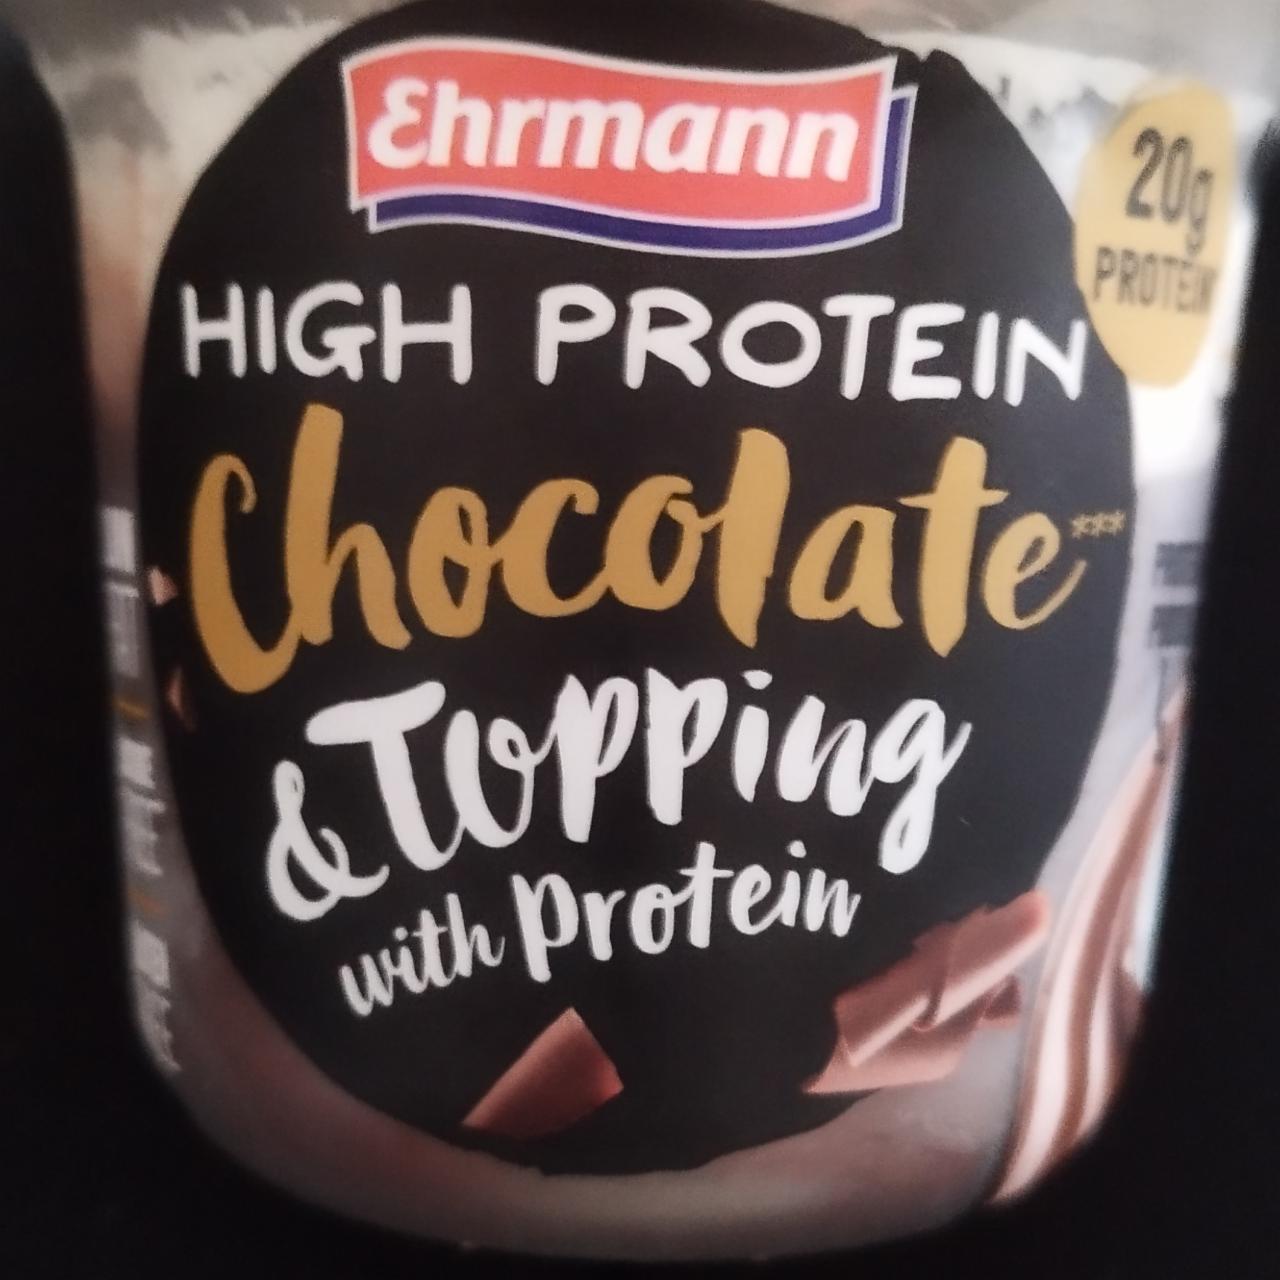 Képek - High protein chocolate & topping with protein Ehrmann